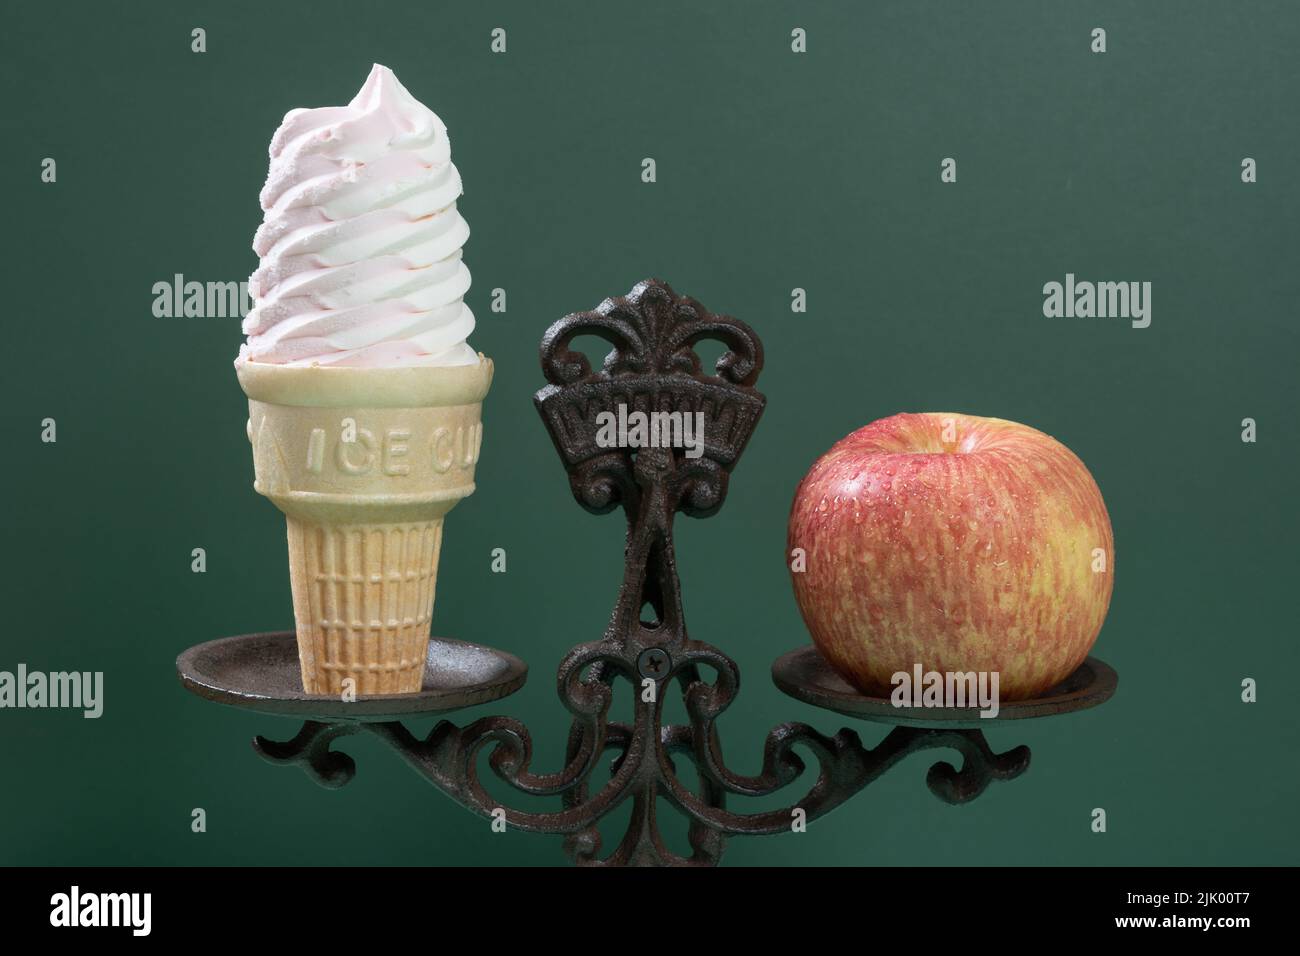 close up of ice cream cone and apple on a balanced scale concept of healthy eating Stock Photo